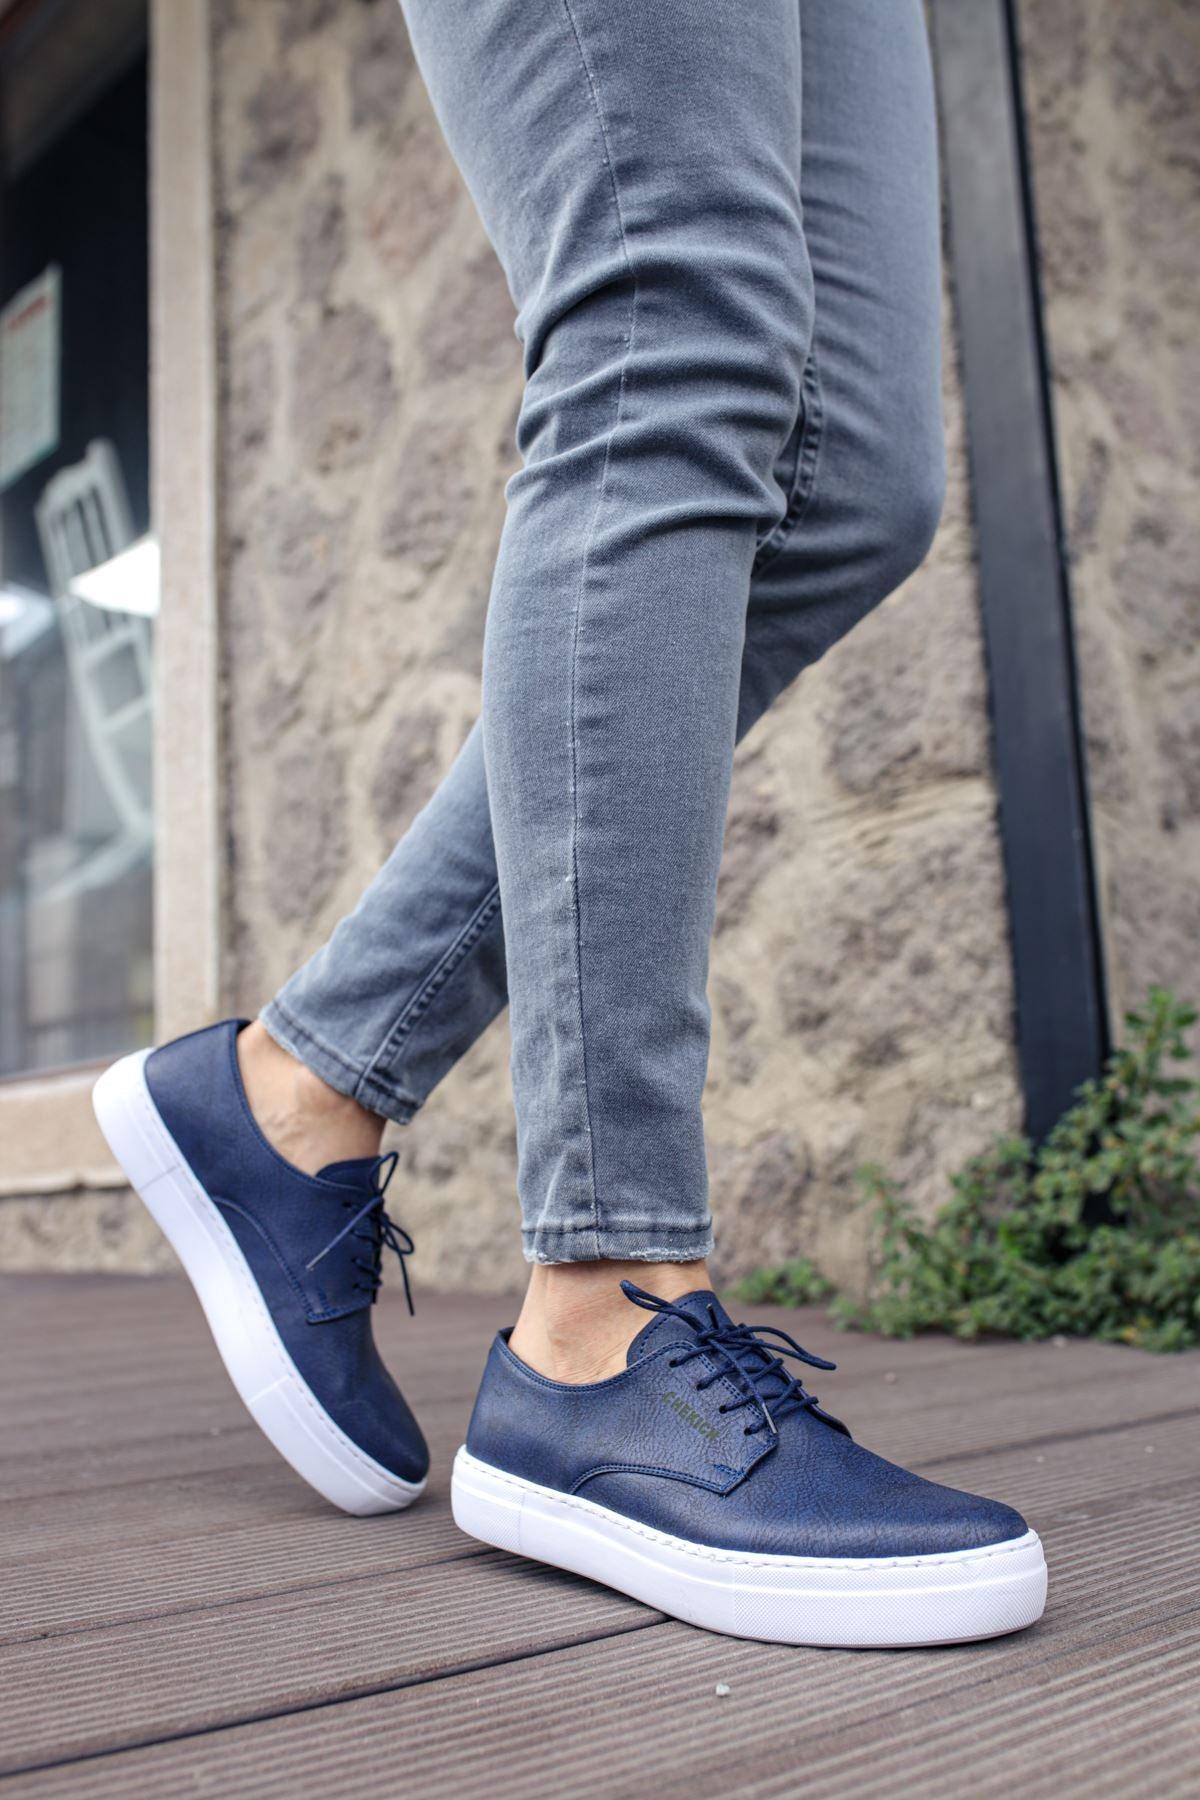 CH005 Men's Navy Blue-White Sole Pneumatic Leather-Orthopedics Casual Sneaker Sports Shoes - STREET MODE ™